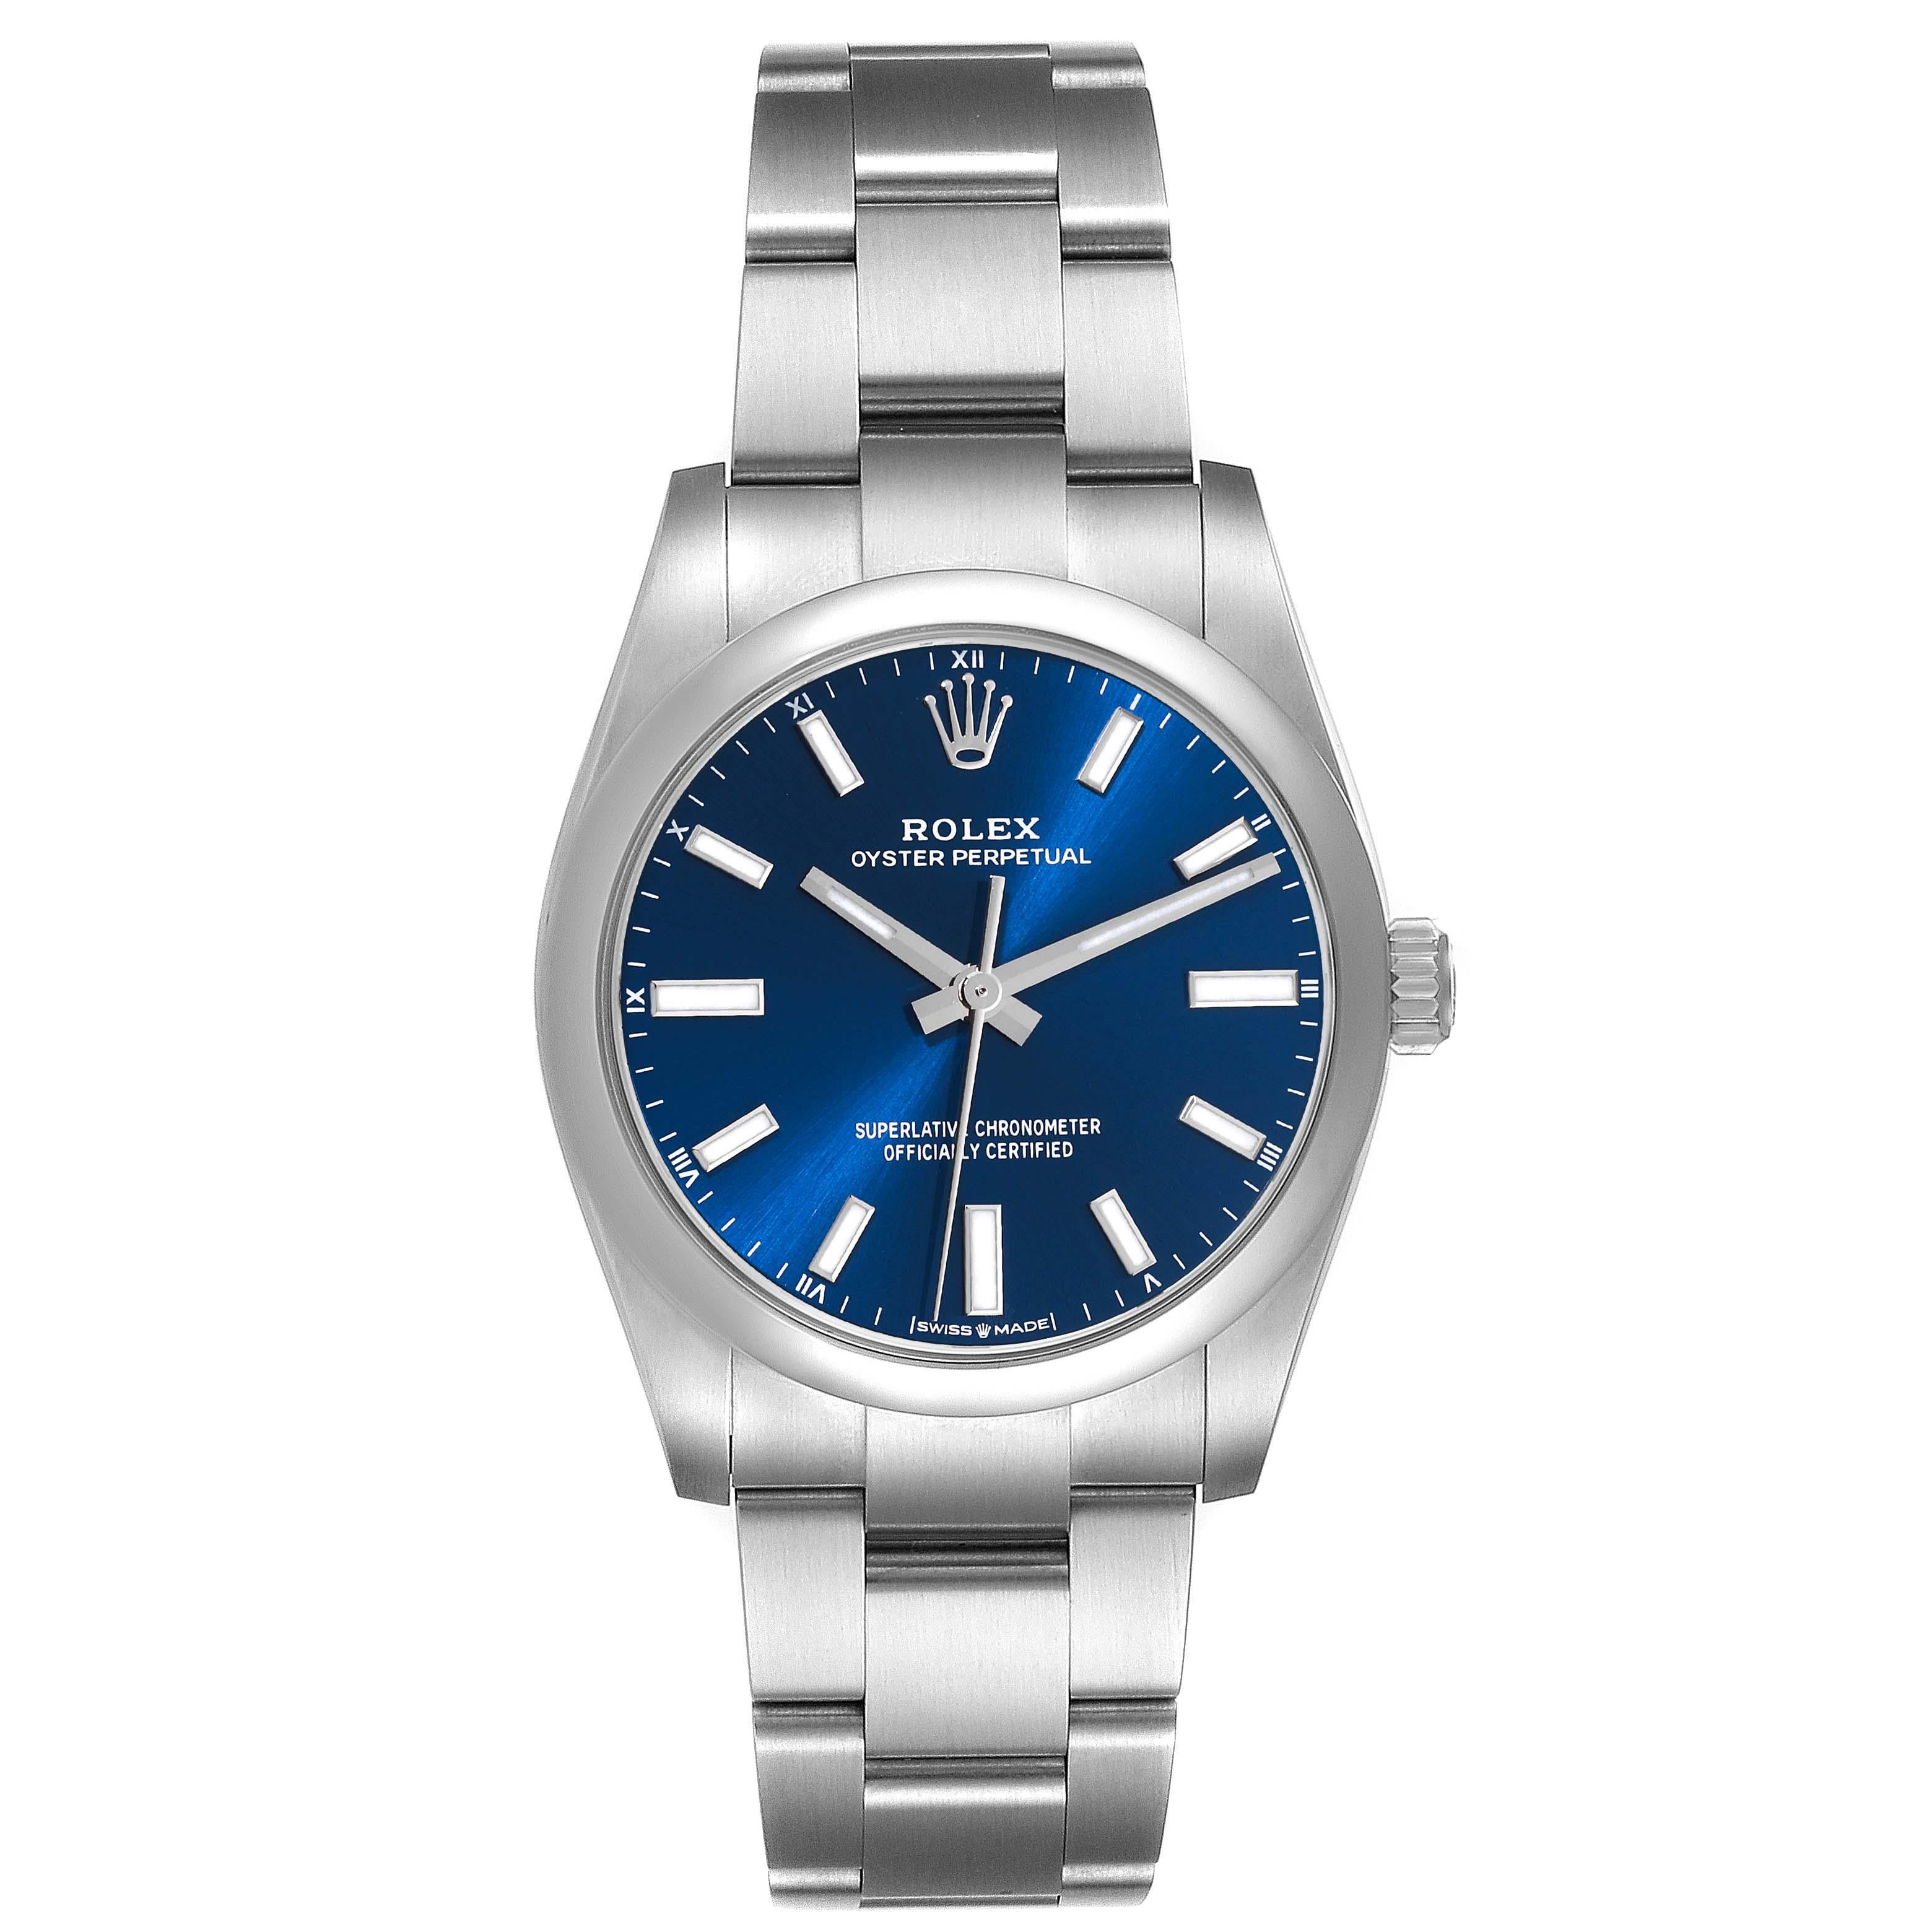 Rolex Oyster Perpetual 34mm Blue Dial Steel Mens Watch 124200 Box Card. Officially certified chronometer automatic self-winding movement. Stainless steel case 34 mm in diameter. Rolex logo on a crown. Stainless steel smooth domed bezel. Scratch